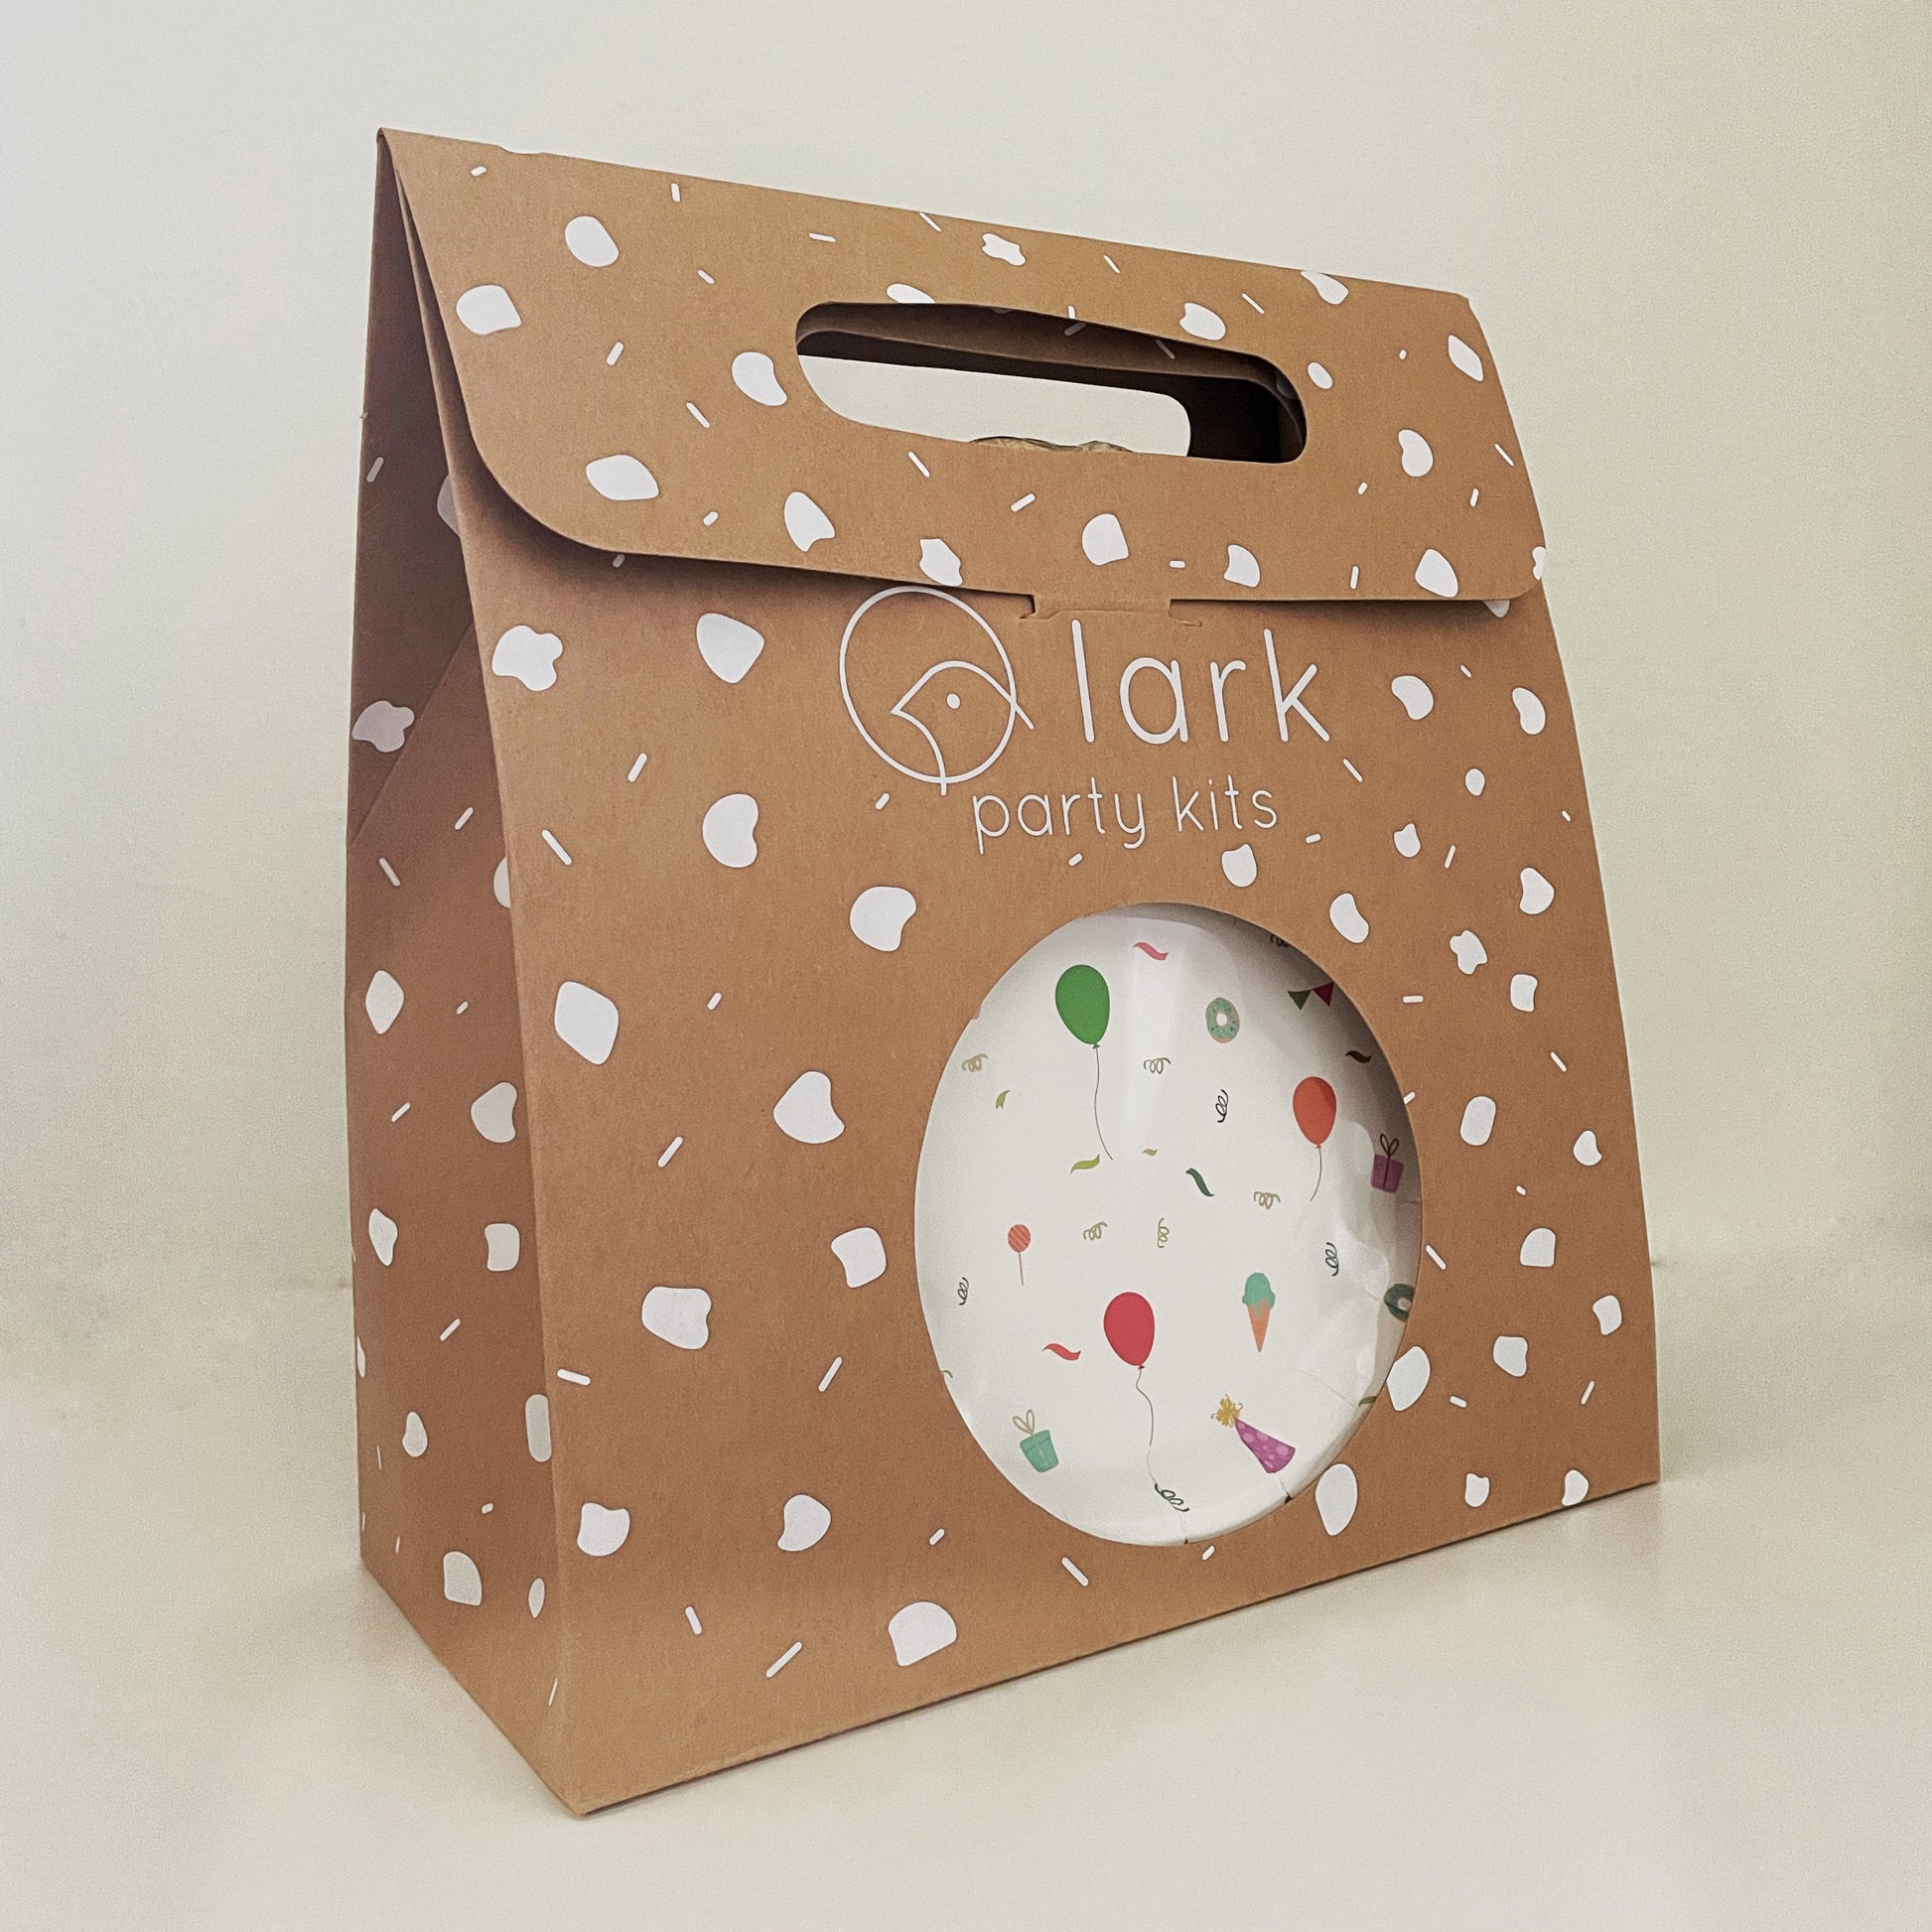 The Celebration Party Kit in its kraft brown and white carry box. The box features a handle and a circular opening where you can see the contents inside.